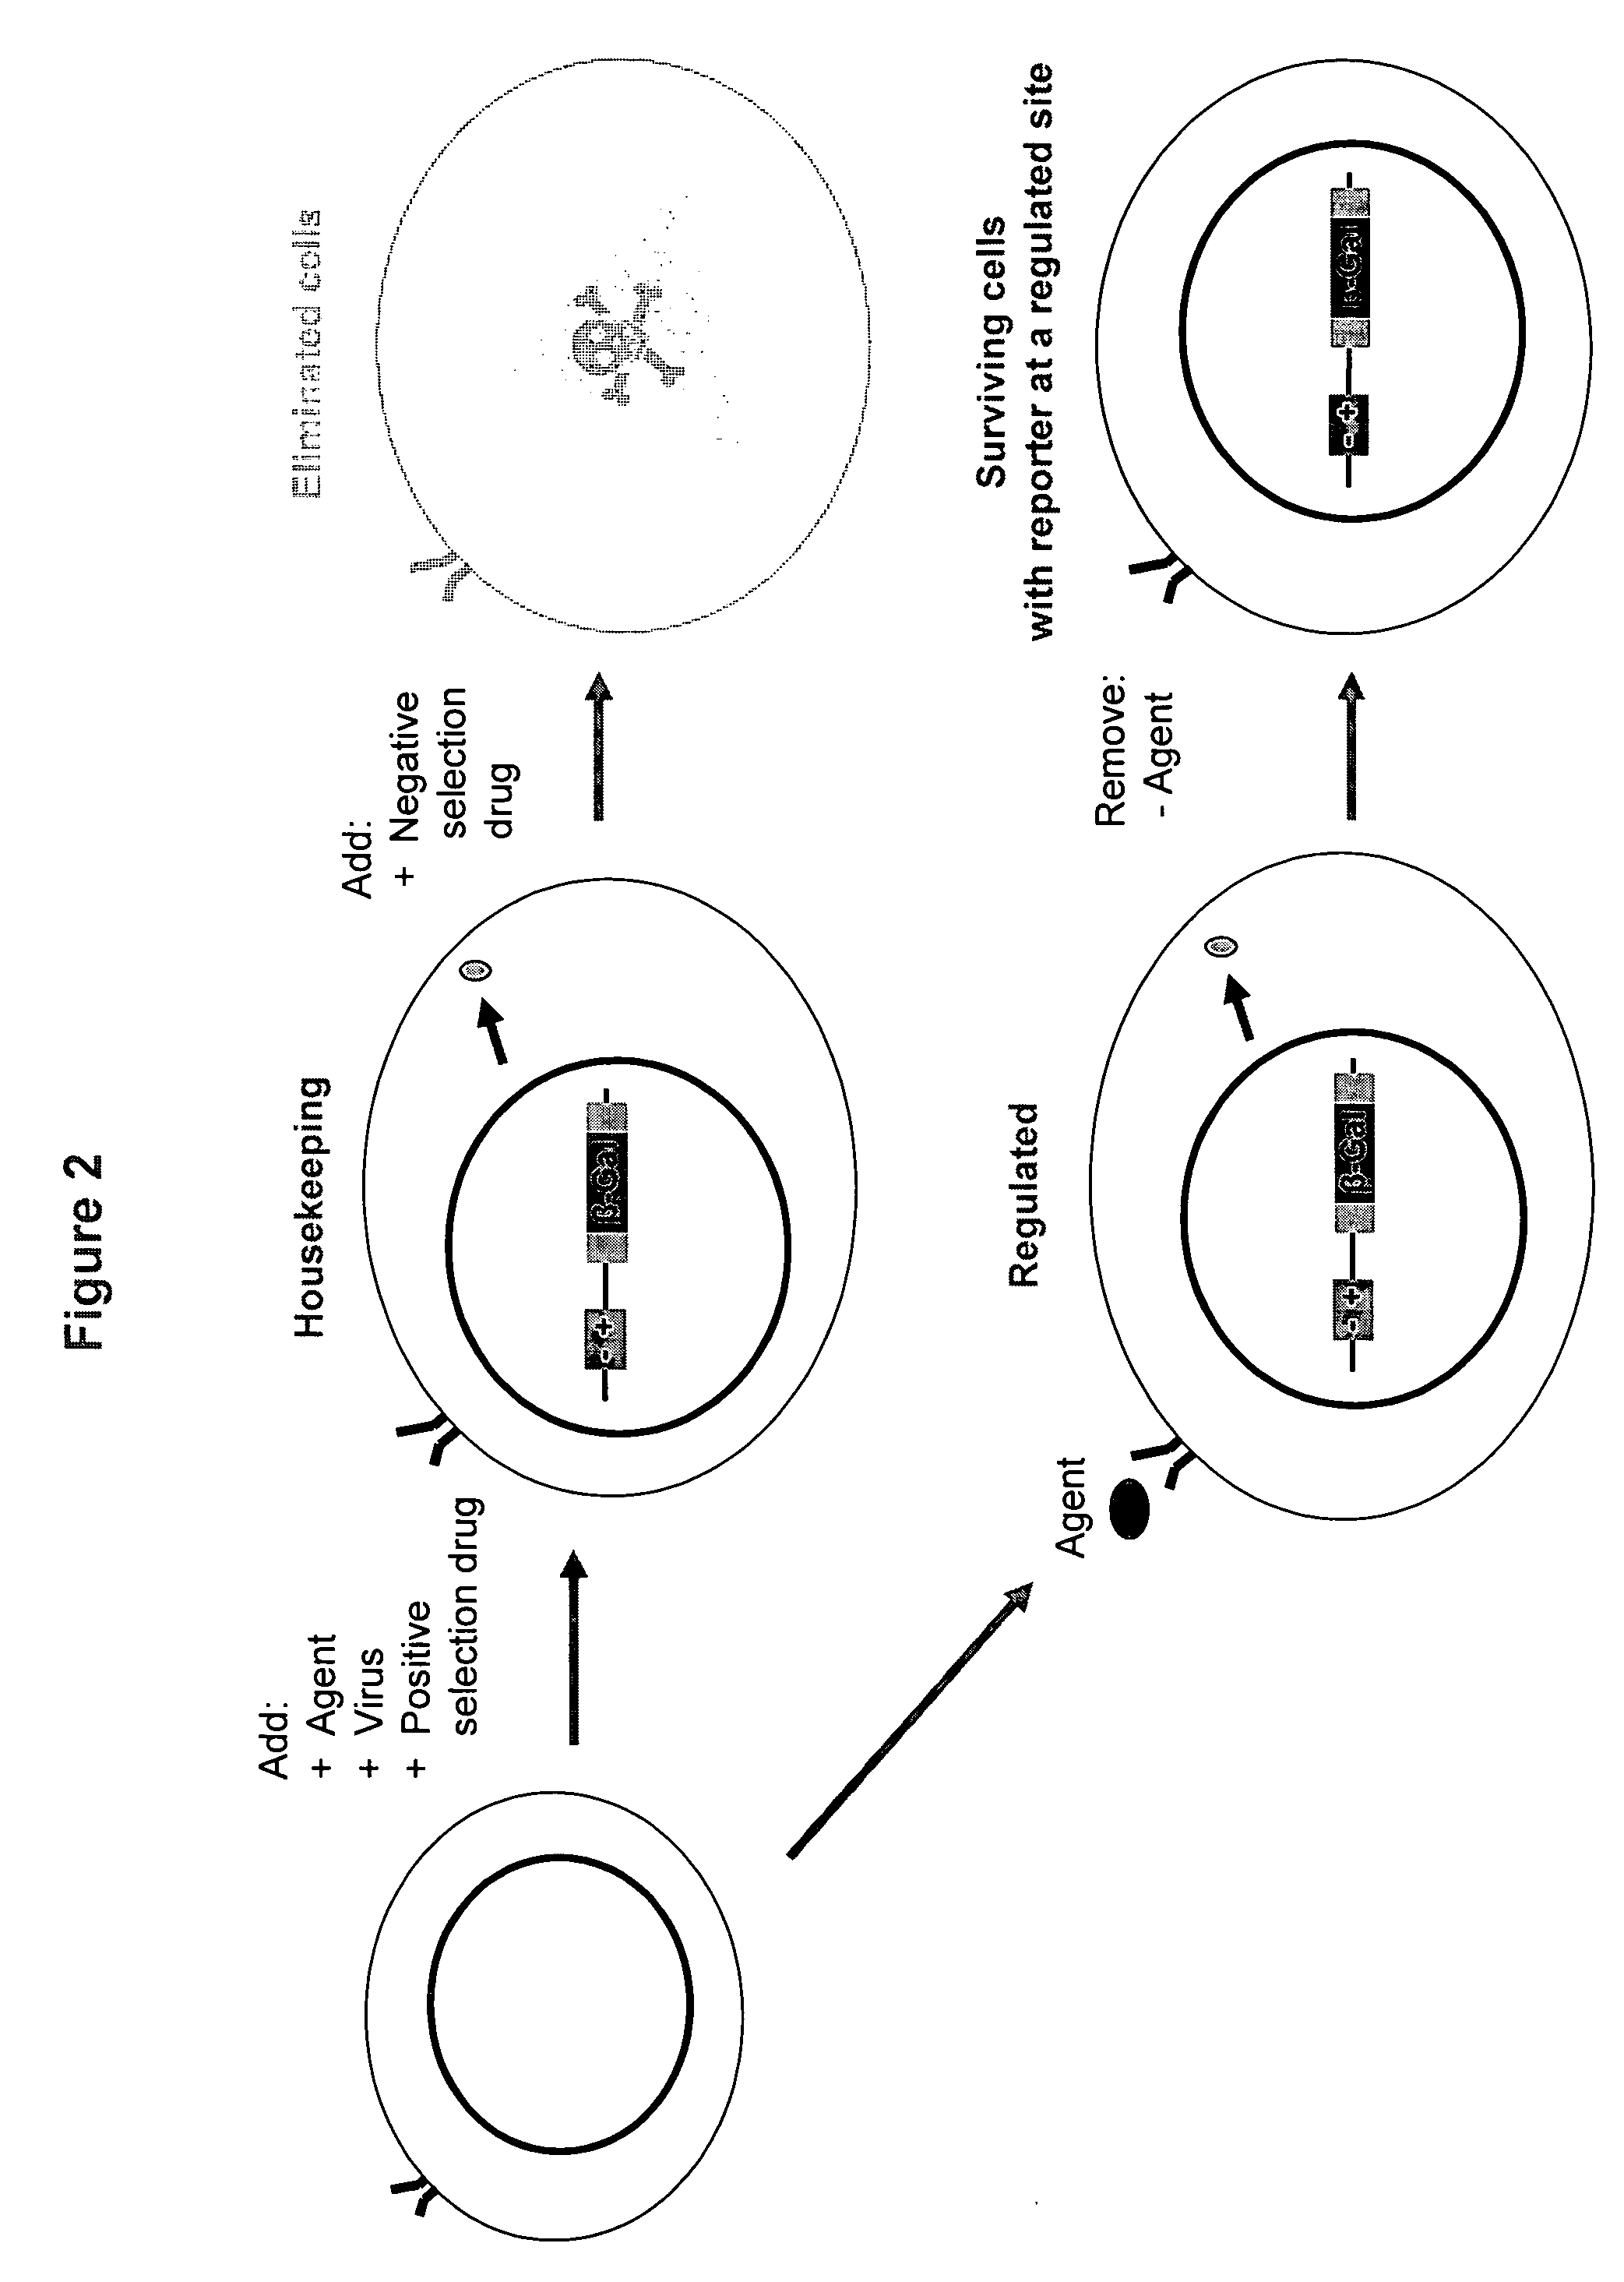 Treatment of refractory cancers using Na+/K+-ATPase inhibitors